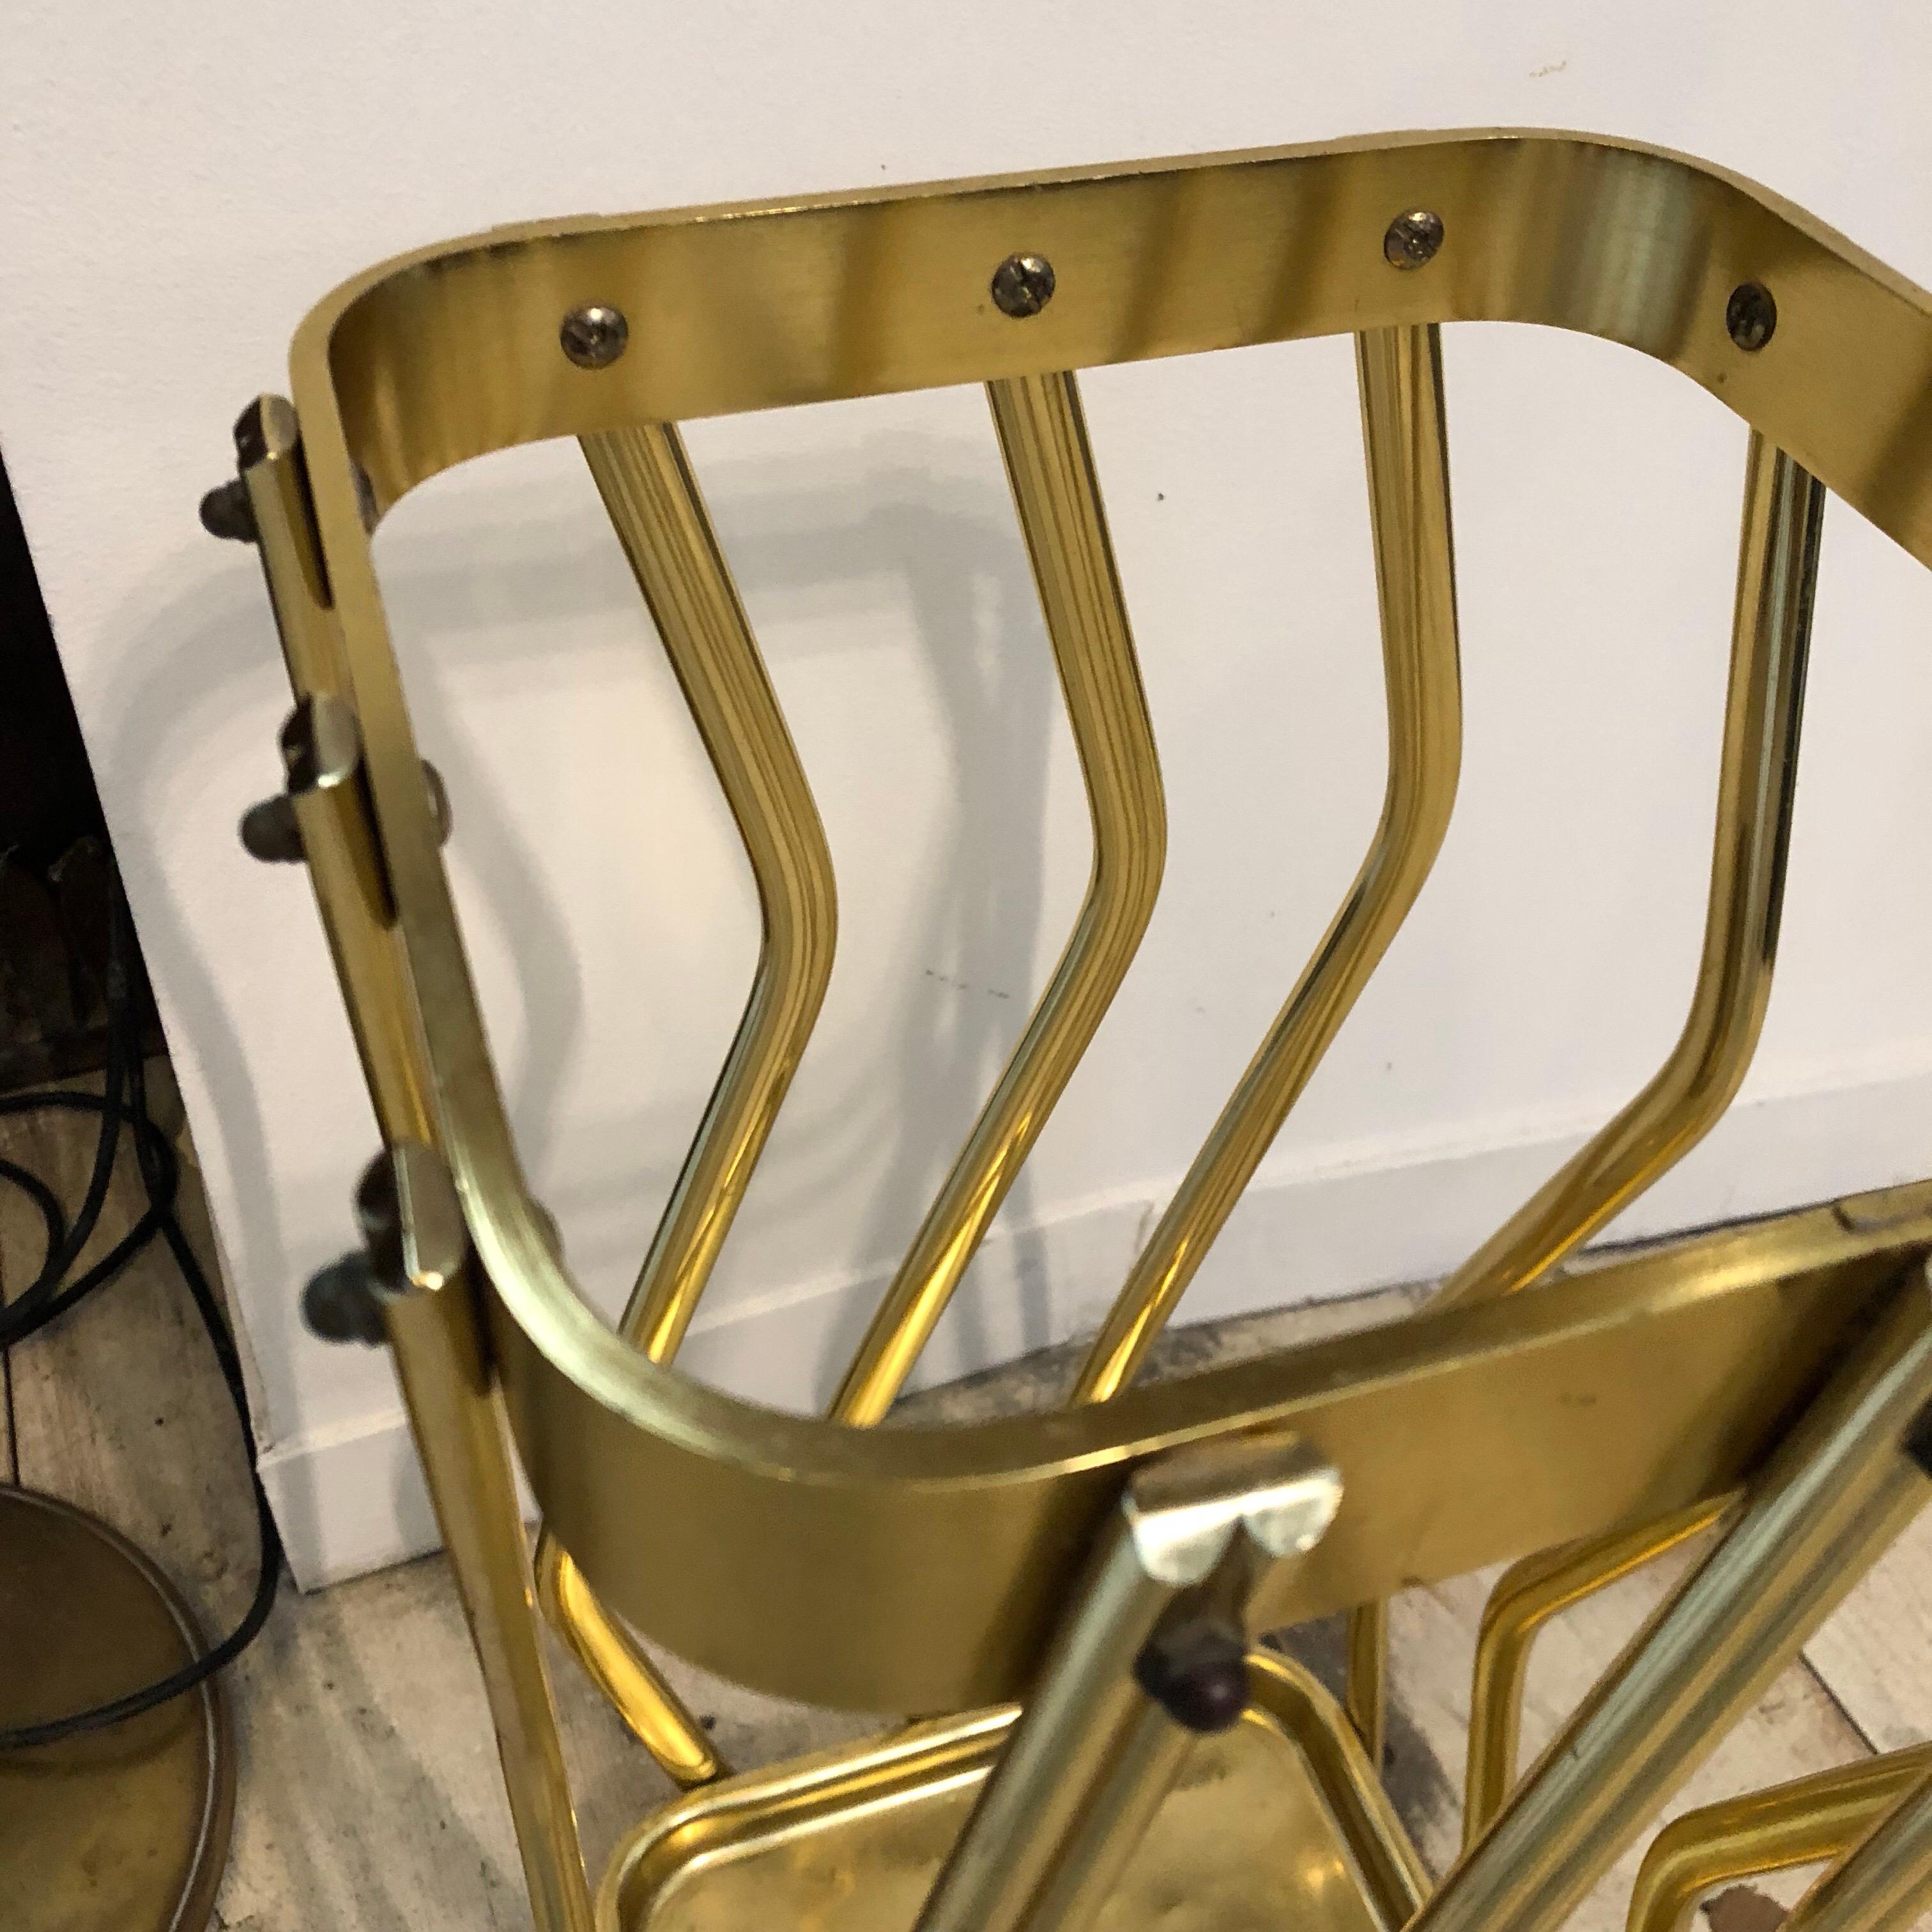 Stylish heavy brass umbrella Stand, good conditions overall.